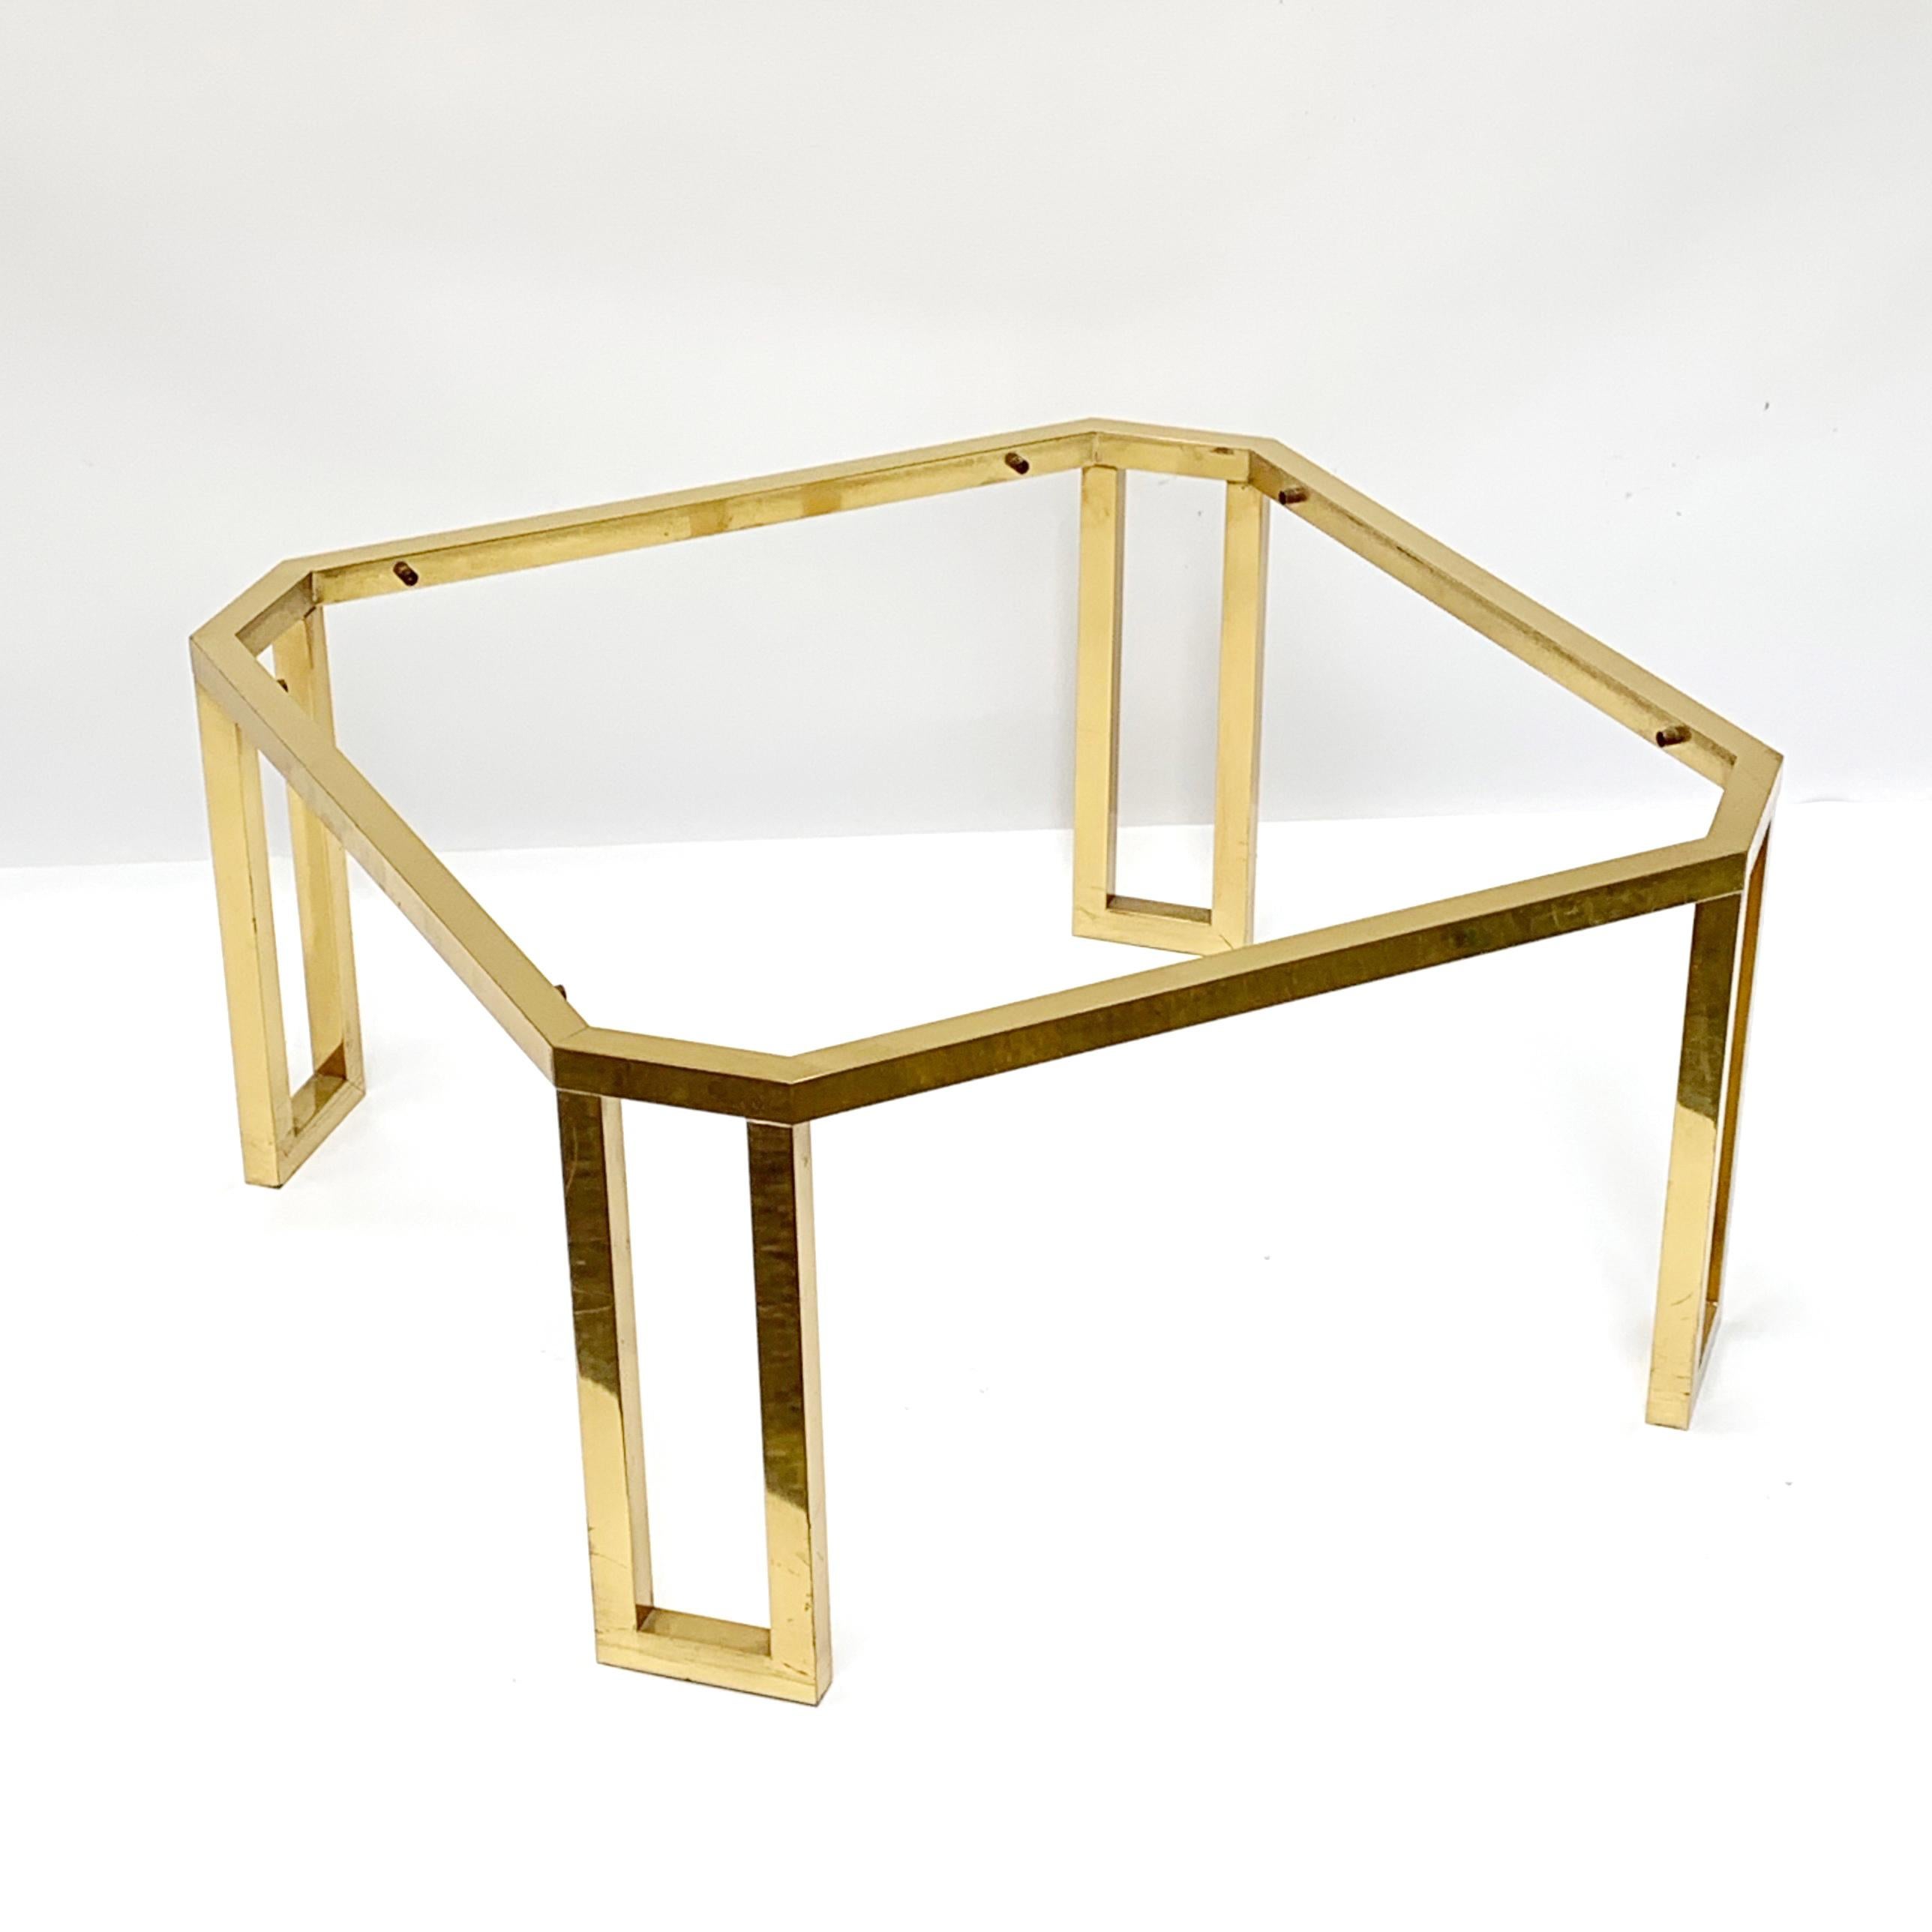 Smoked Glass Maison Jansen Octagonal Tables in Brass and Glass, France, 1970s Coffee Tables For Sale